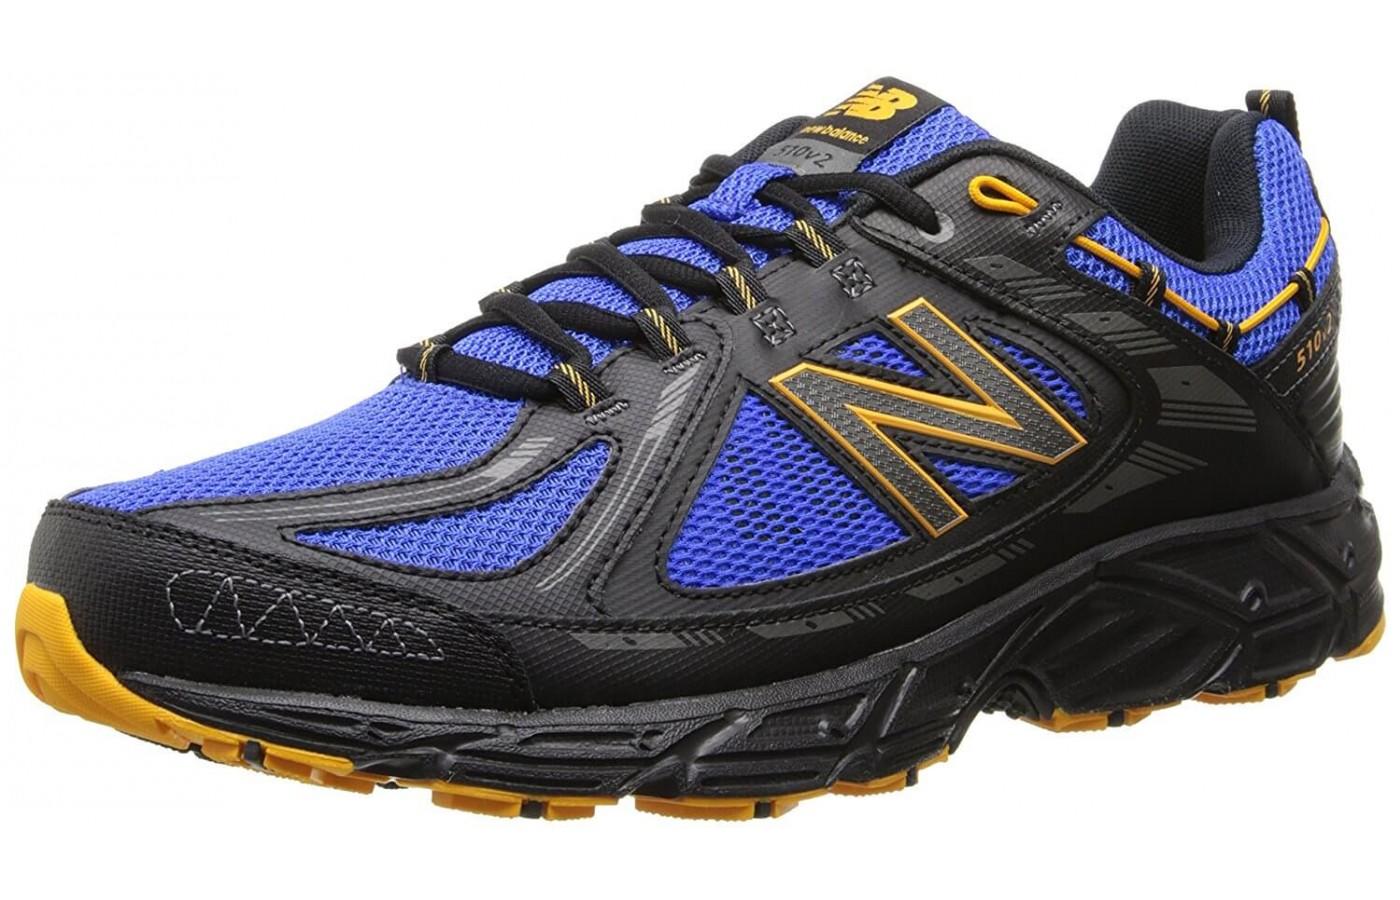 the New Balance 510 v2 is a durable and affordable trail runner